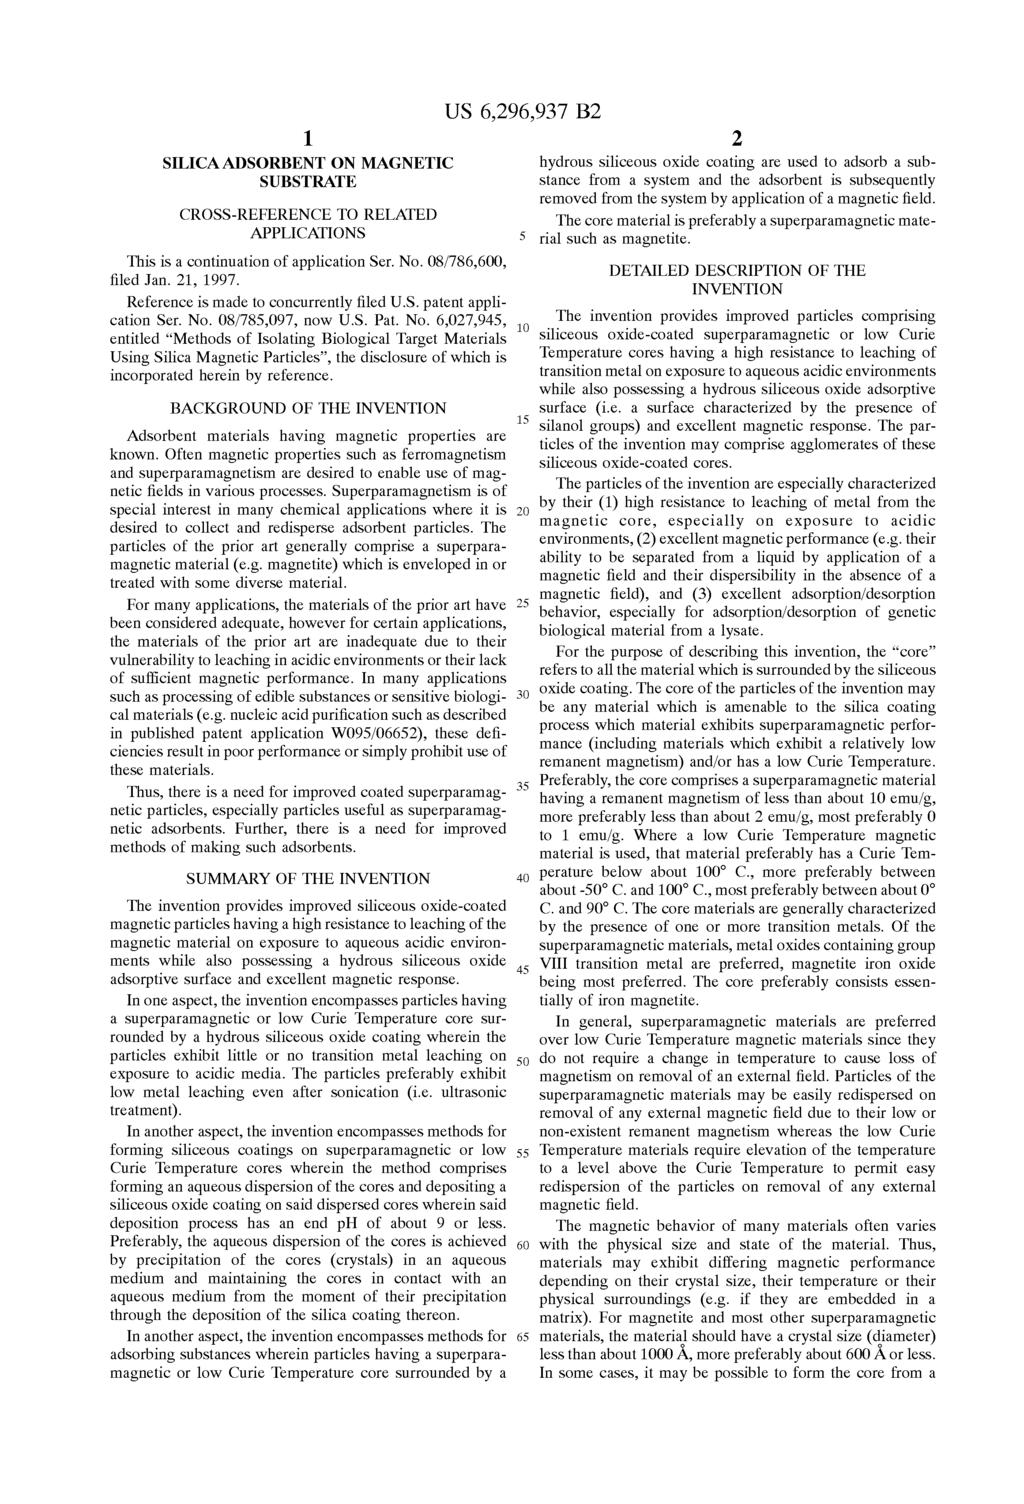 1 SILICA AIDSORBENT ON MAGNETIC SUBSTRATE CROSS-REFERENCE TO RELATED APPLICATIONS This is a continuation of application Ser. No. 08/786,0, filed Jan. 21, 1997.